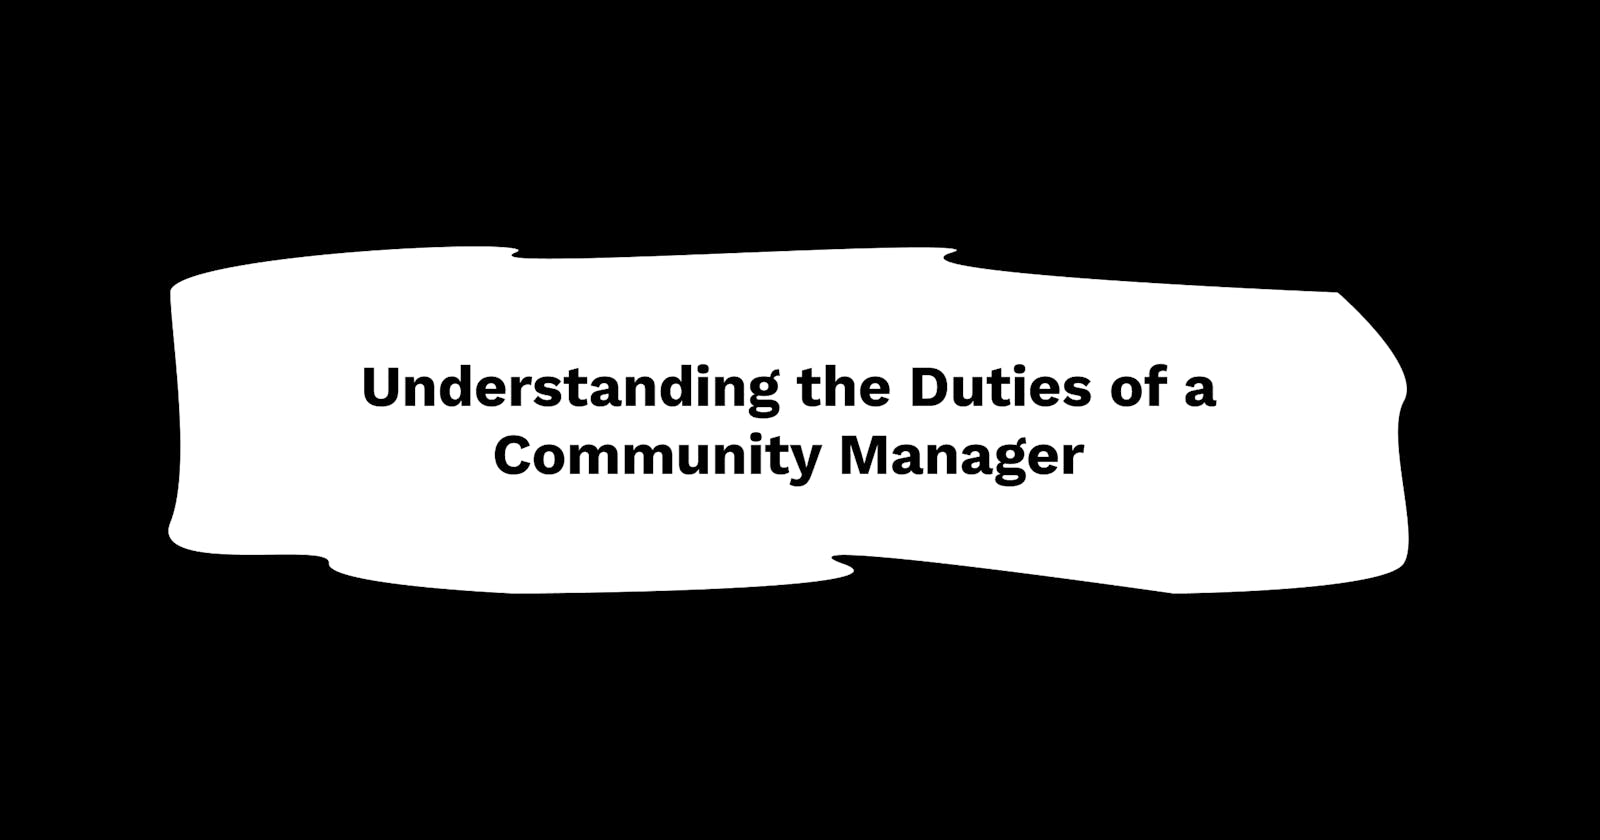 Understanding the Duties of a Community Manager